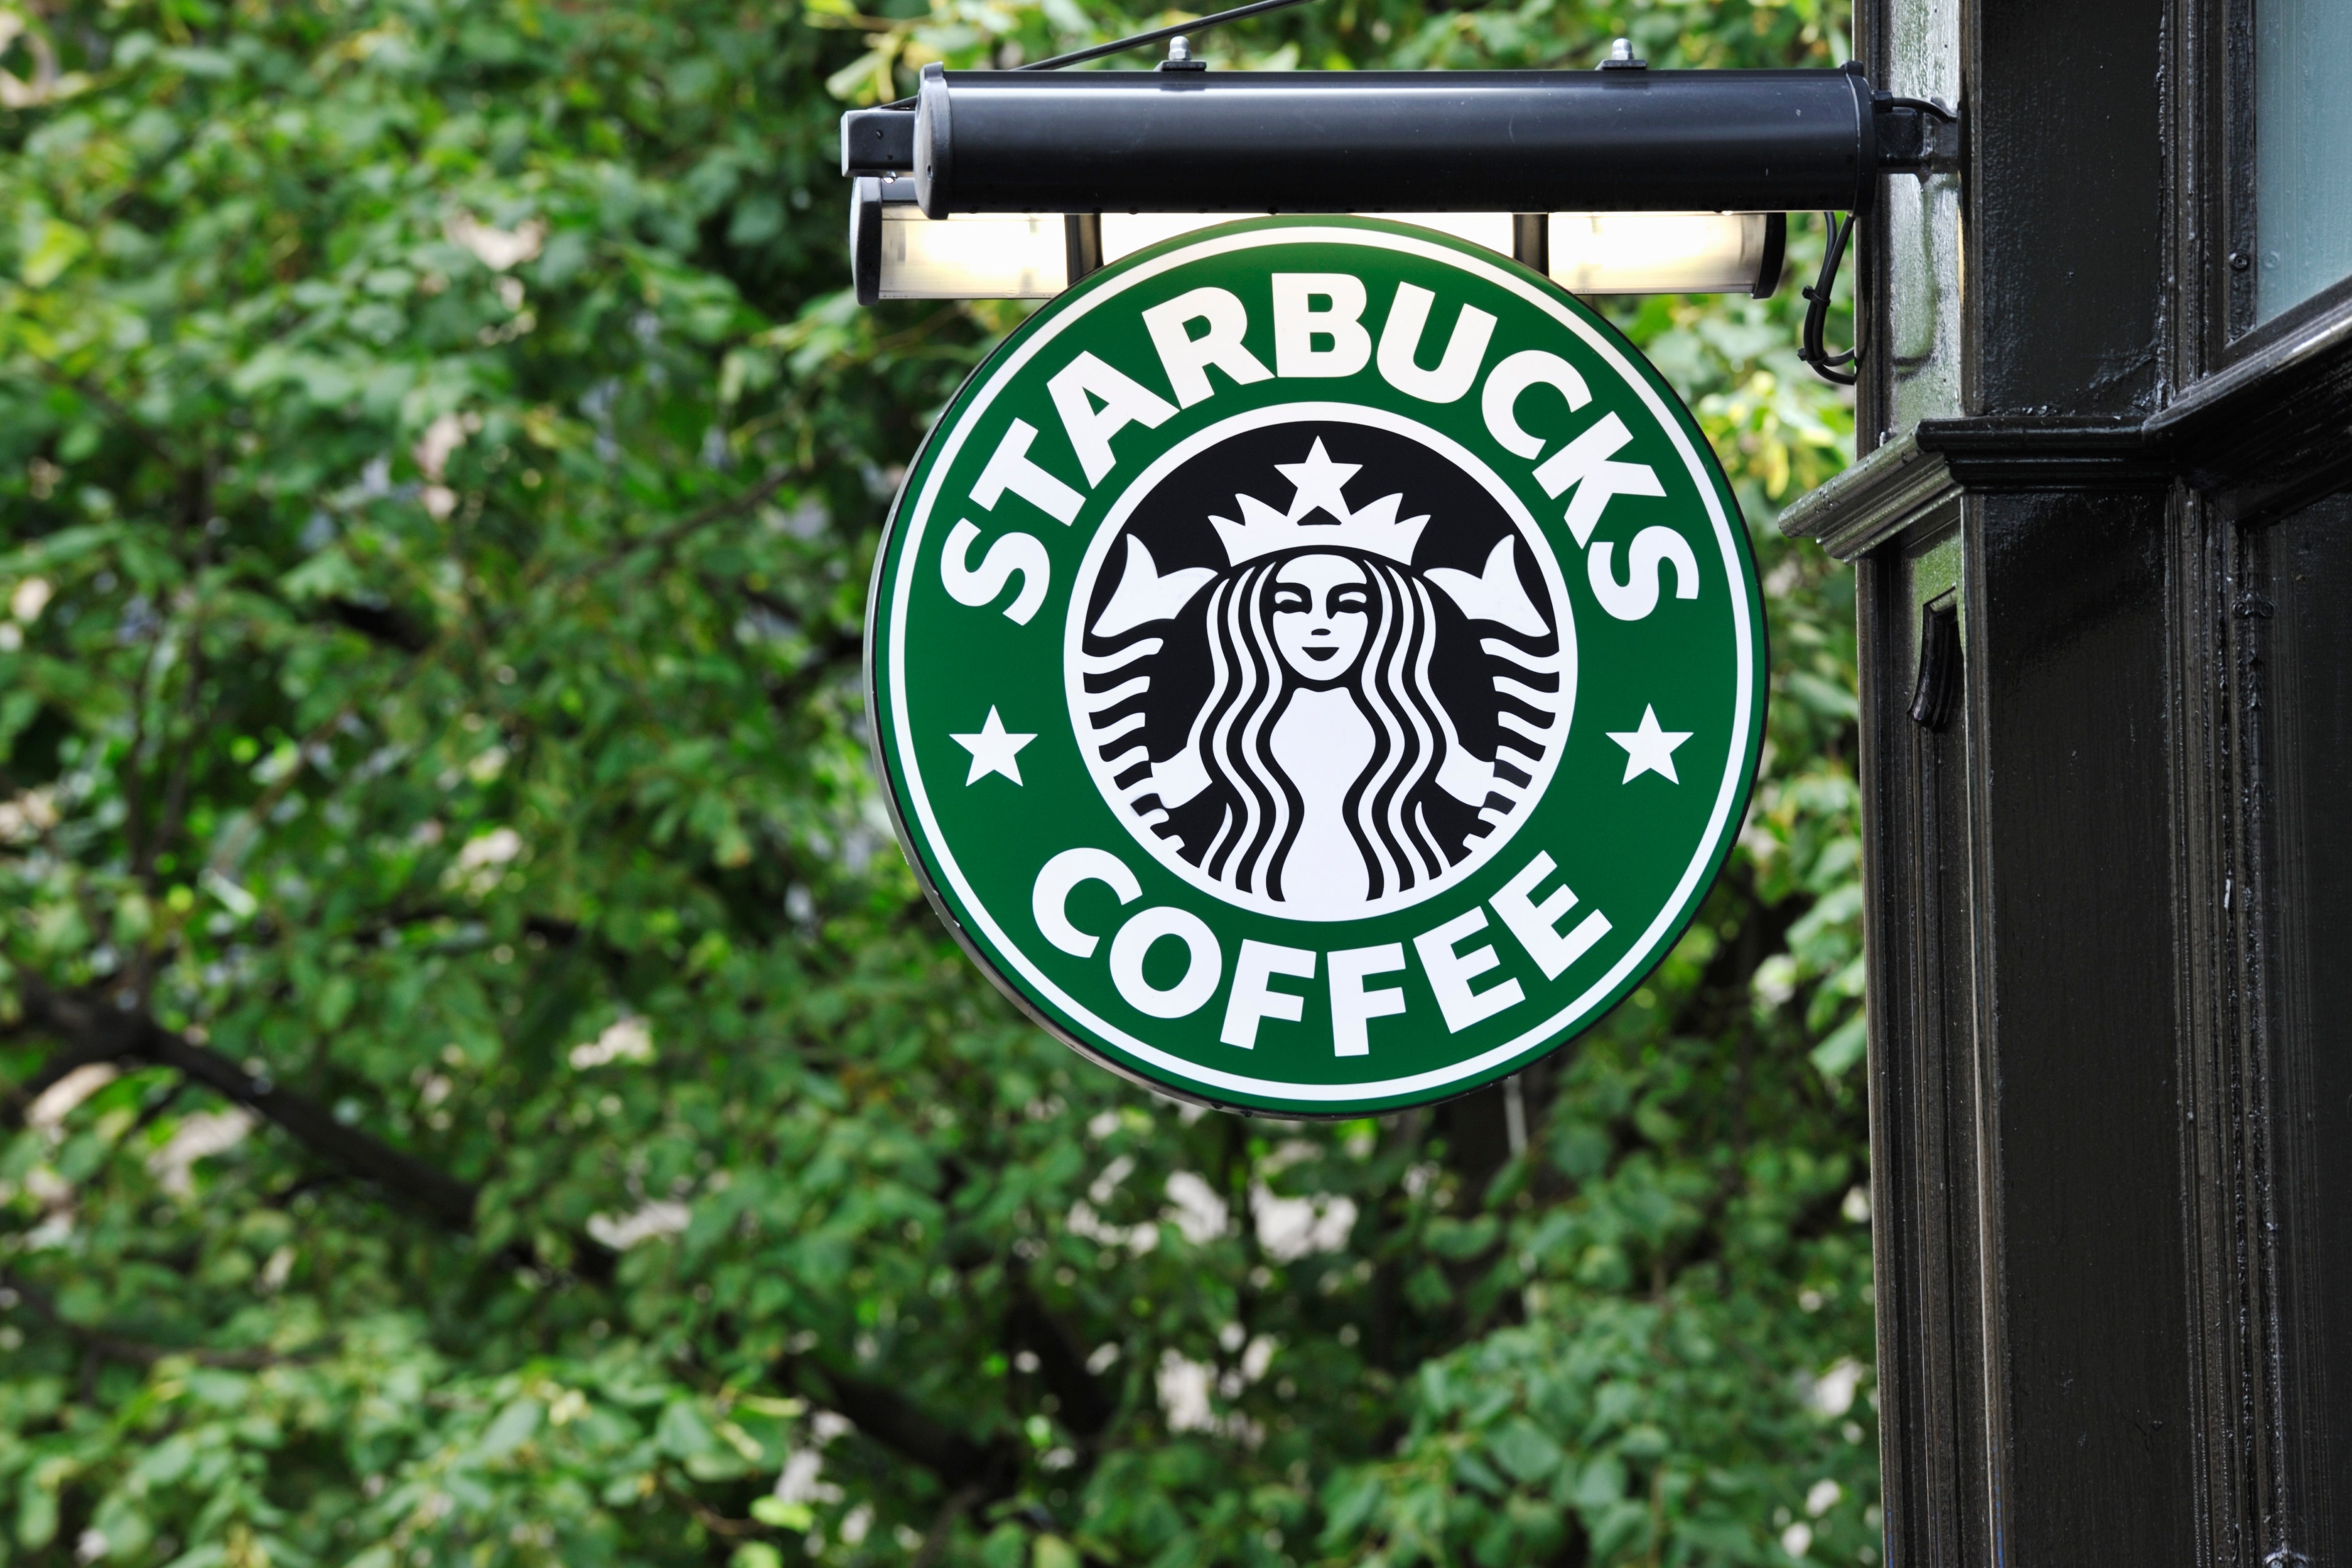 Starbucks barista says you can get a drink for 60 cents